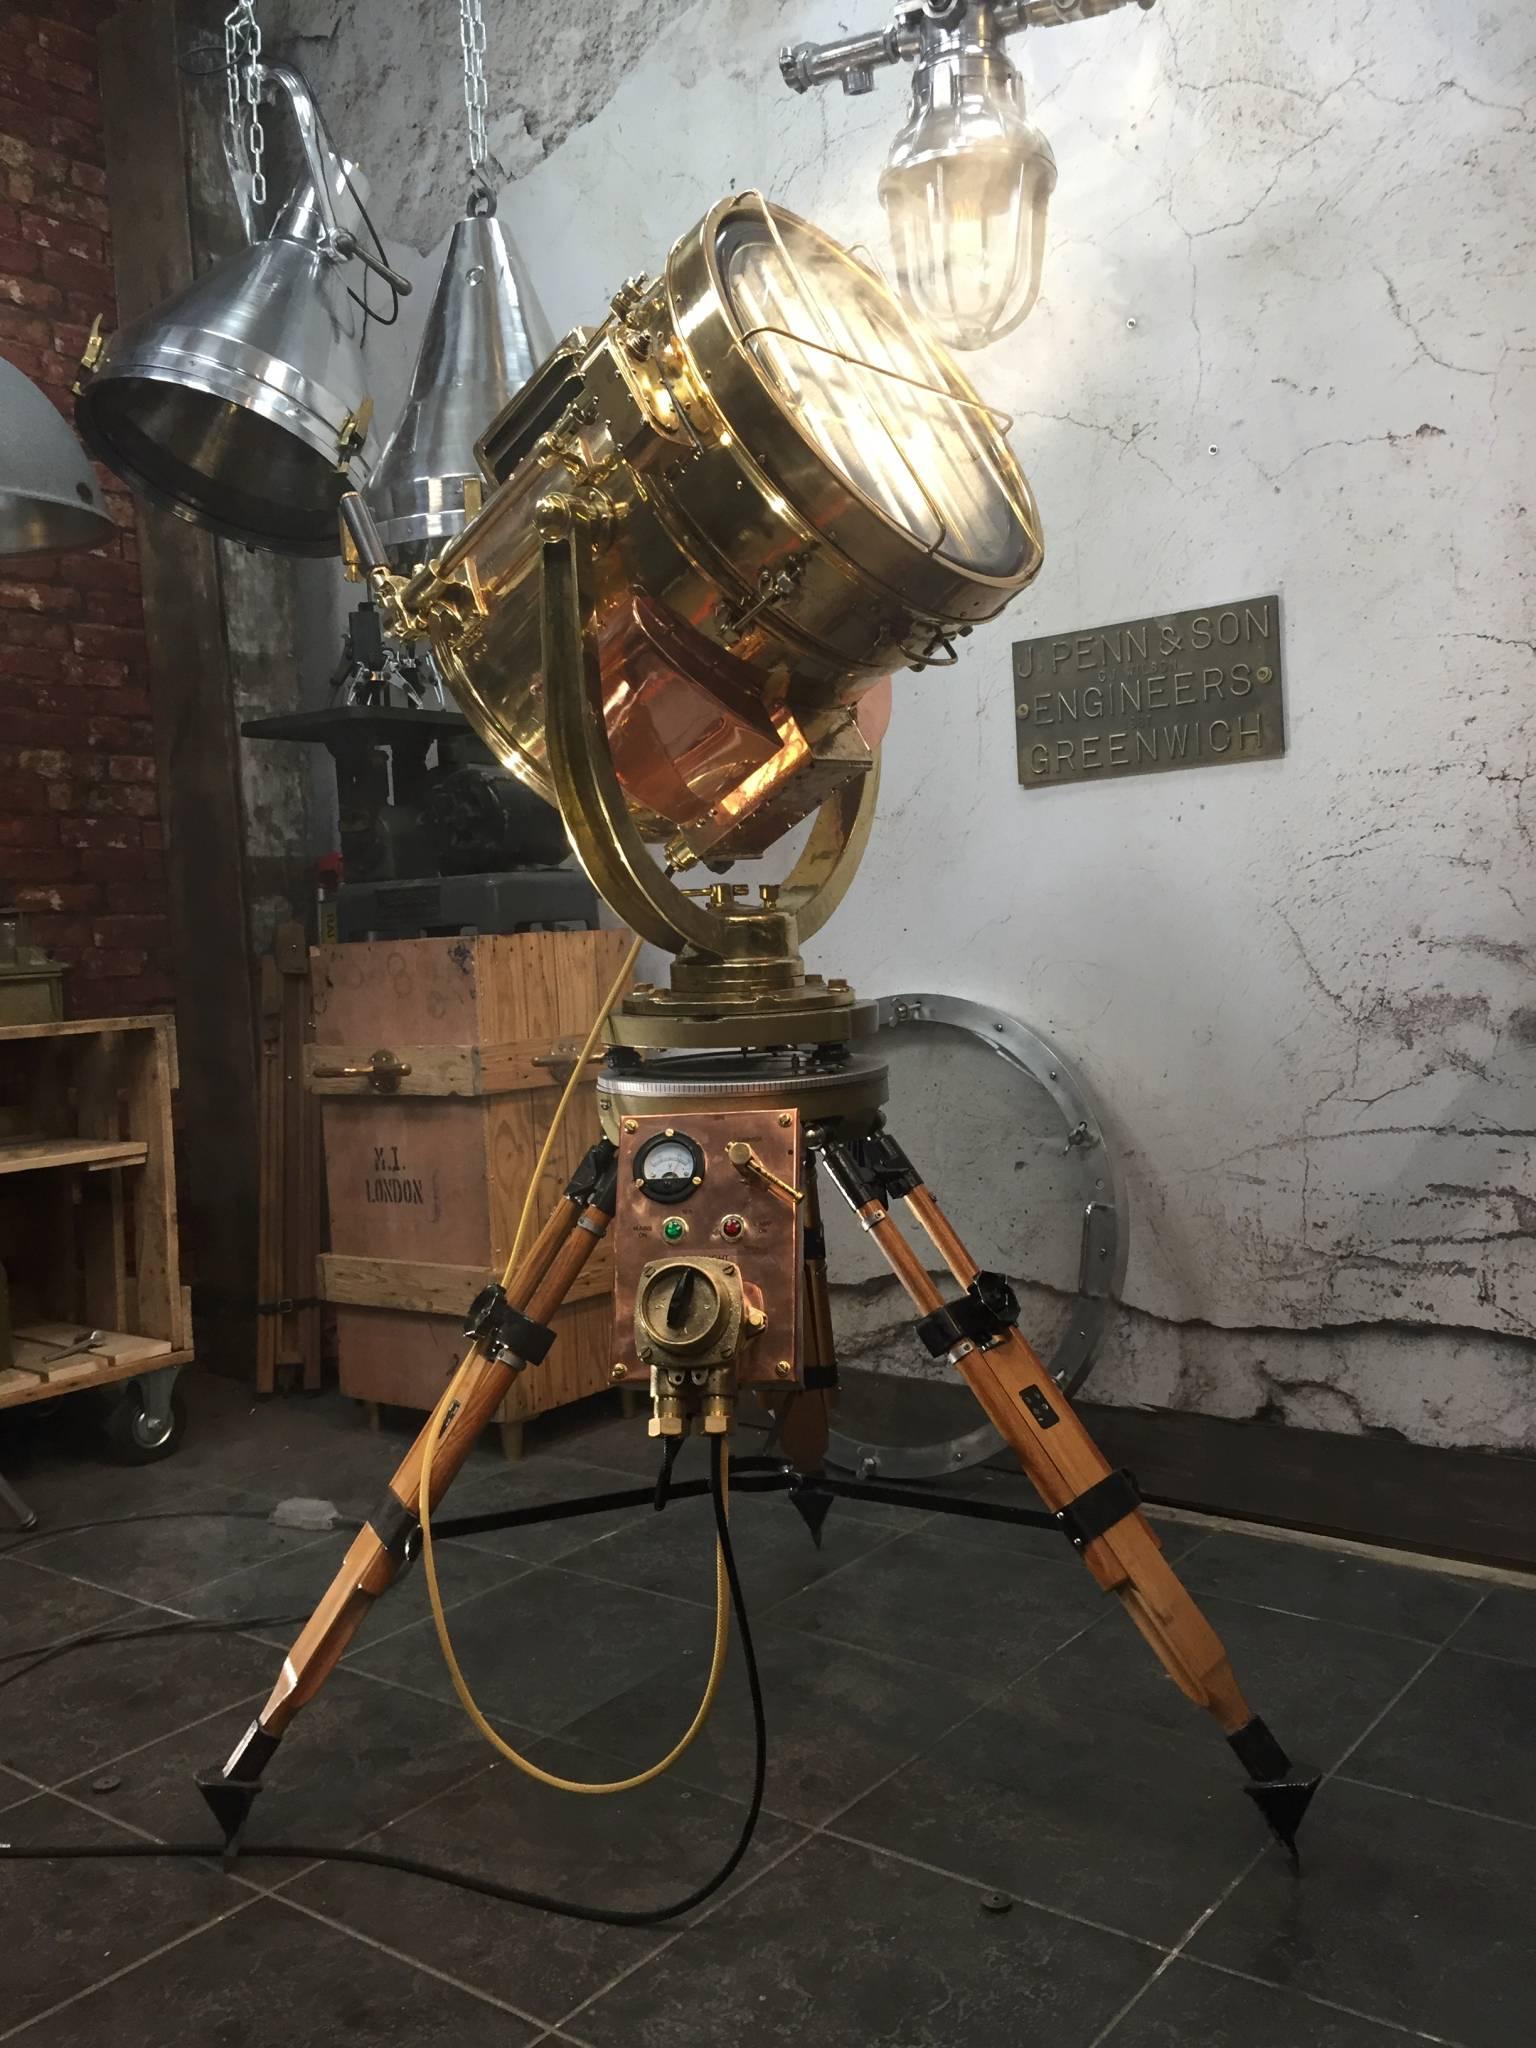 This is a Shonan Kosakusho daylight signalling lamp made in 1981, married with a Russian military gyroscope tripod. 

Reclaimed from Mid-Century war ships, Shonan did manufacture these during World War 2 until the firestorm on Japan ceased